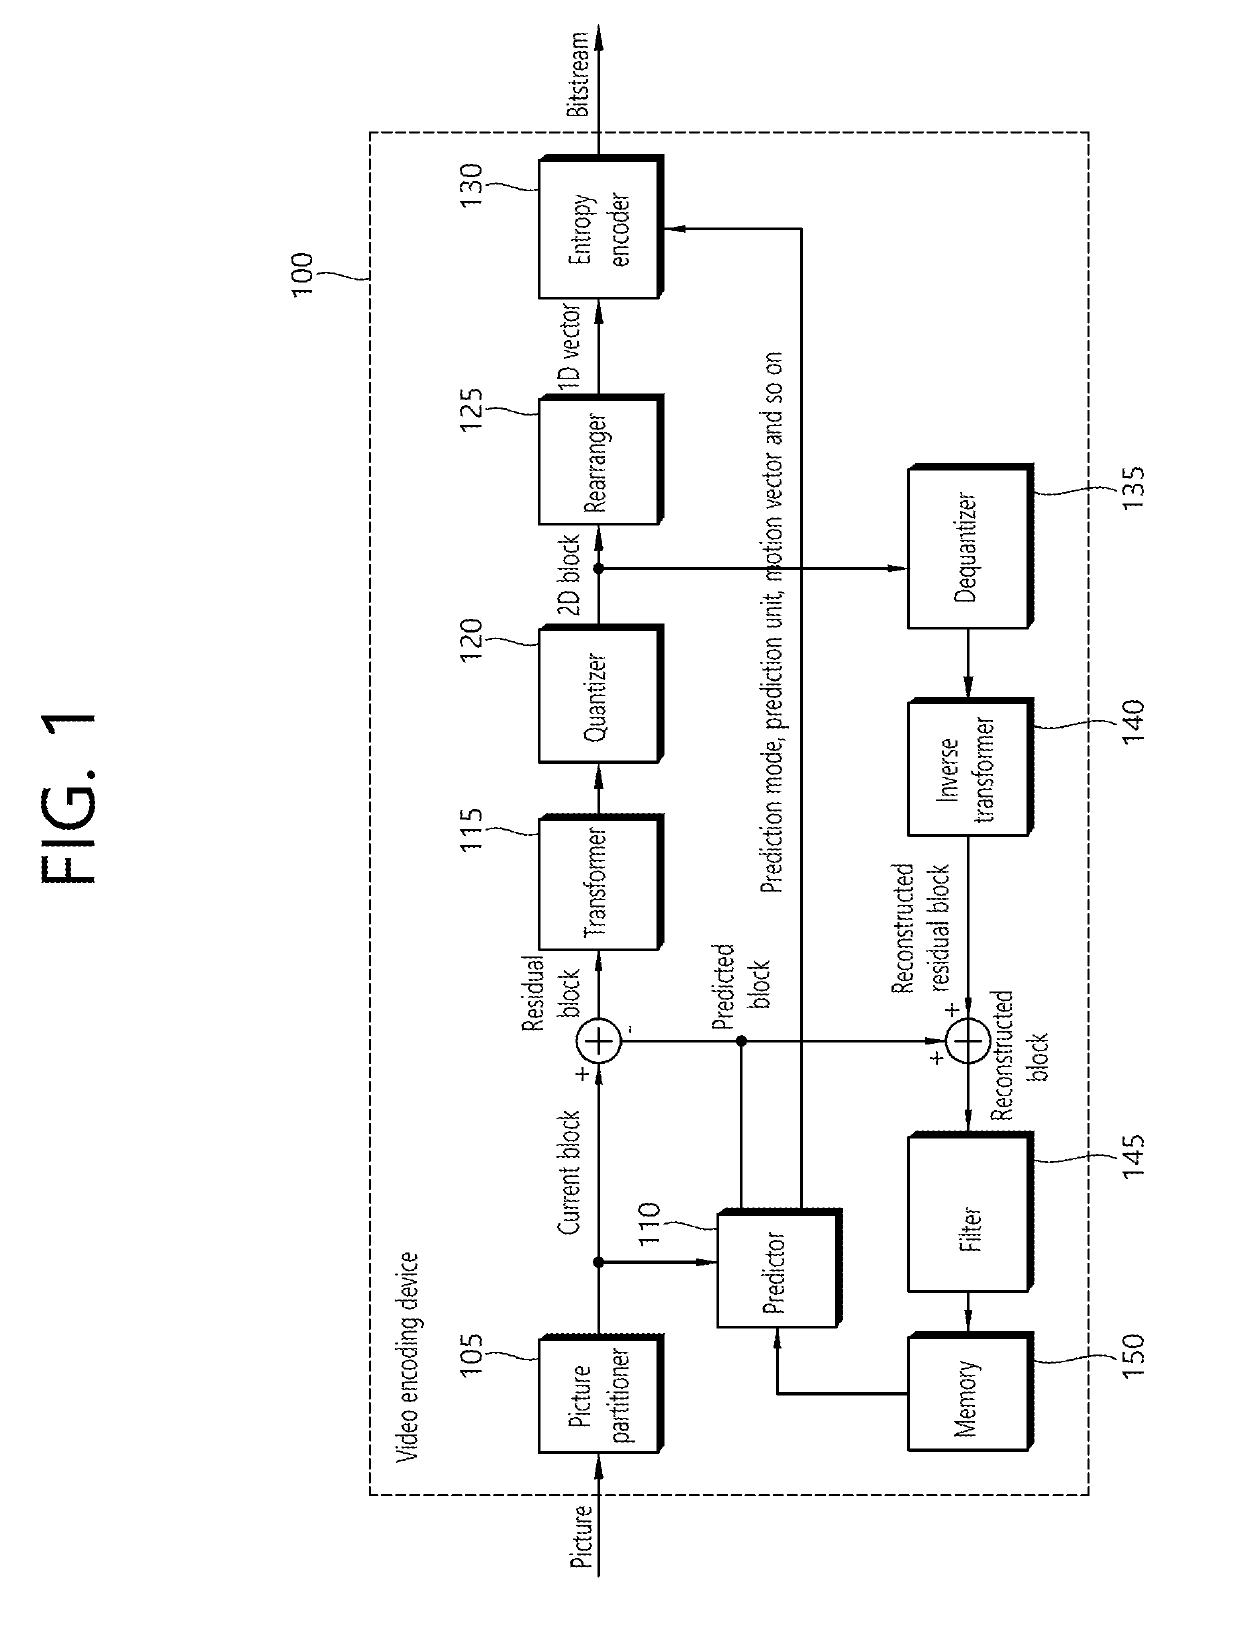 Method and apparatus for inter prediction in video coding system